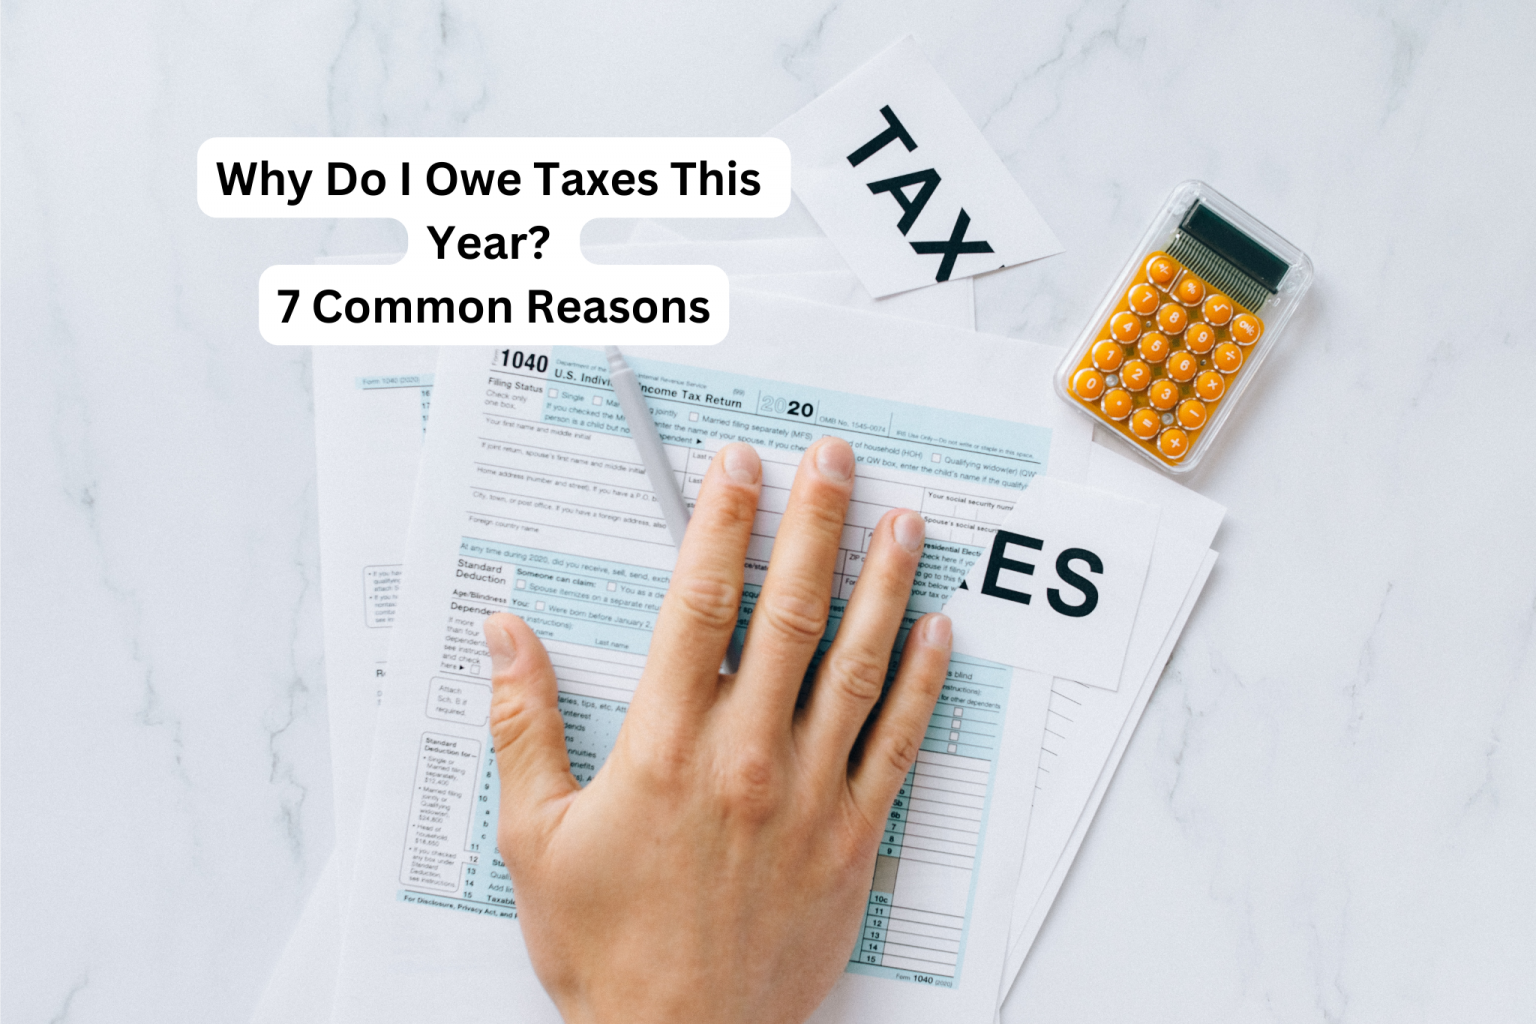 Why Do I Owe Taxes This Year? 7 Common Reasons CuraDebt